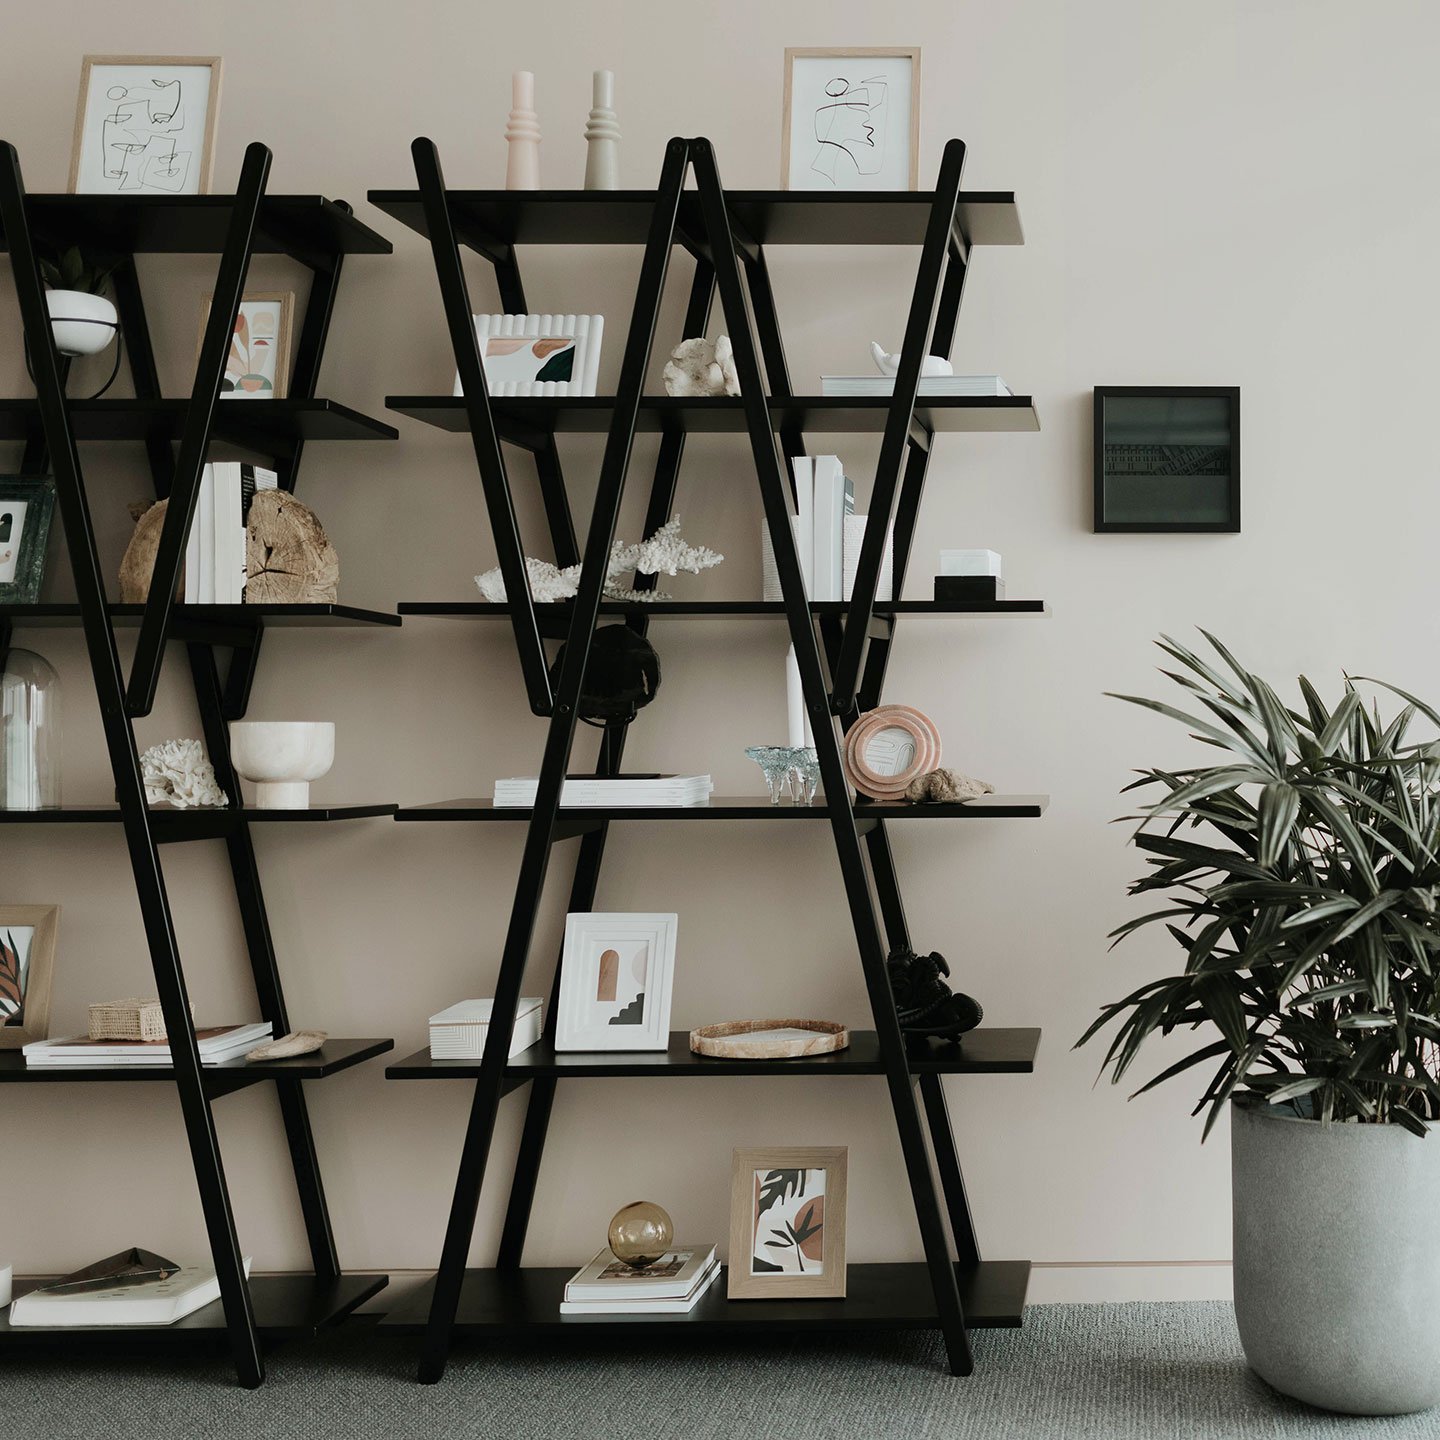 Two Nuvola Rossa shelves in black with décor. 